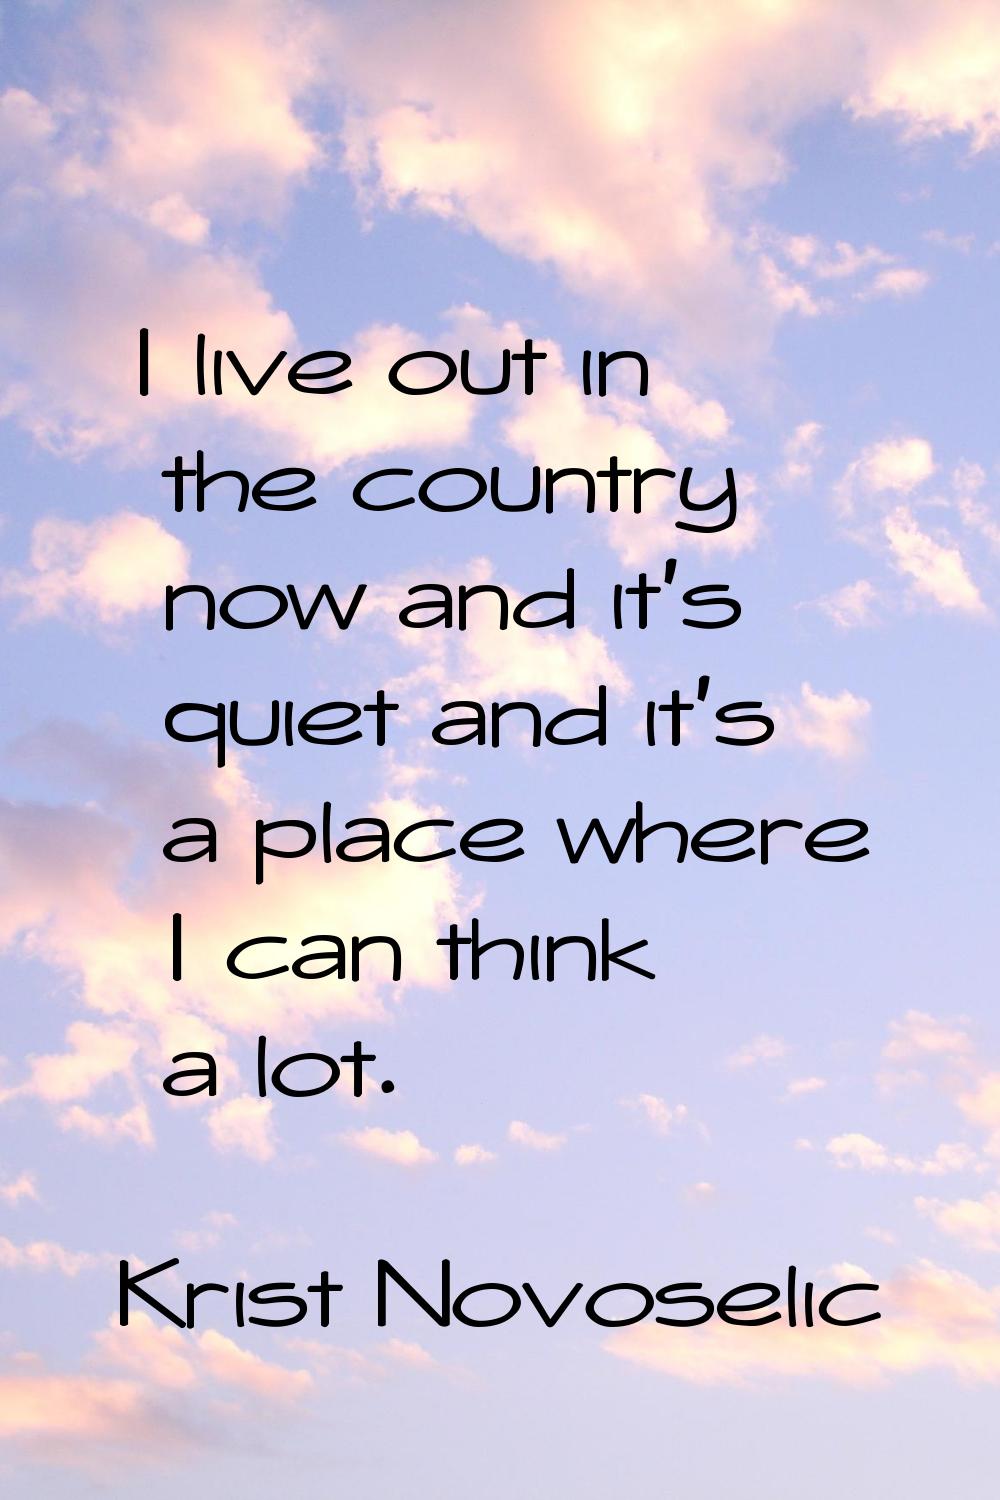 I live out in the country now and it's quiet and it's a place where I can think a lot.